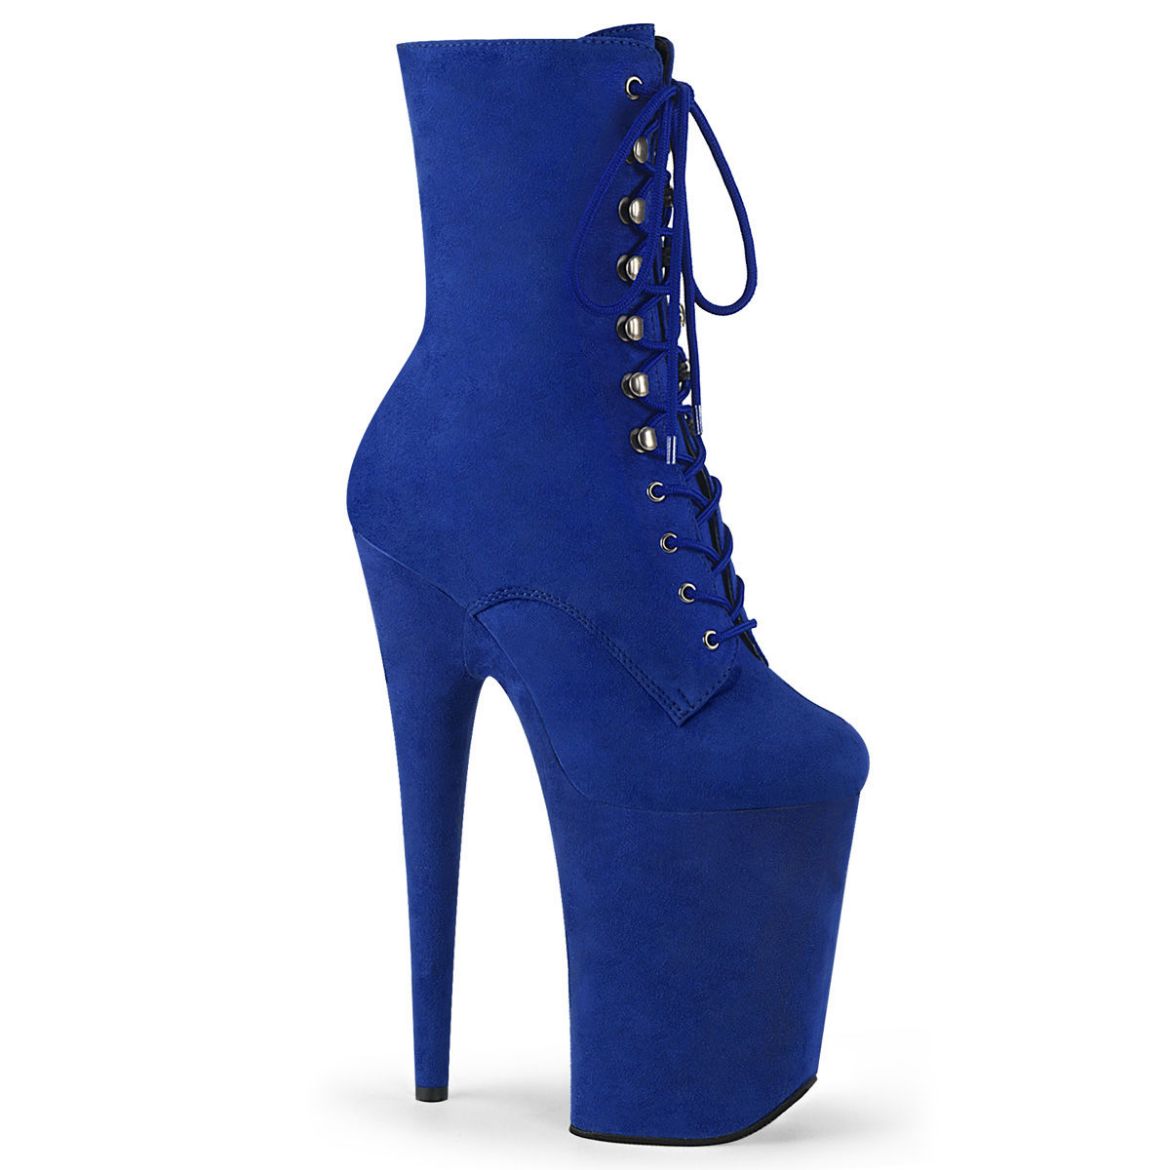 Product image of Pleaser INFINITY-1020FS Royal Blue F.Faux Suede/Royal Blue F.Faux Suede 9 inch (23 cm) Heel 5 1/4 inch (13.5 cm) Platform Lace-Up Front Ankle Boot Side Zip